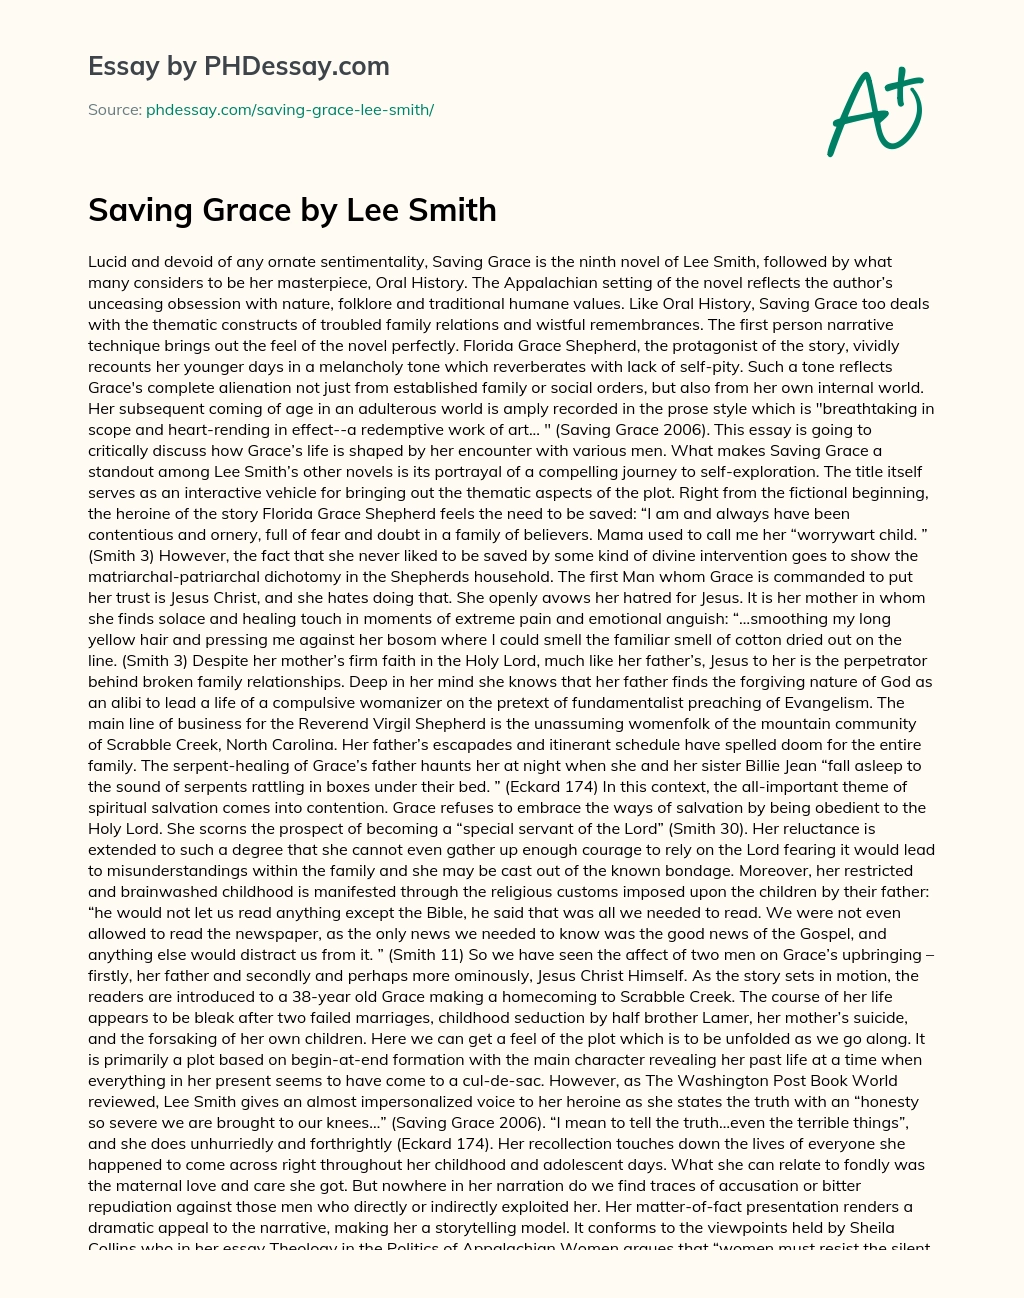 Saving Grace by Lee Smith essay